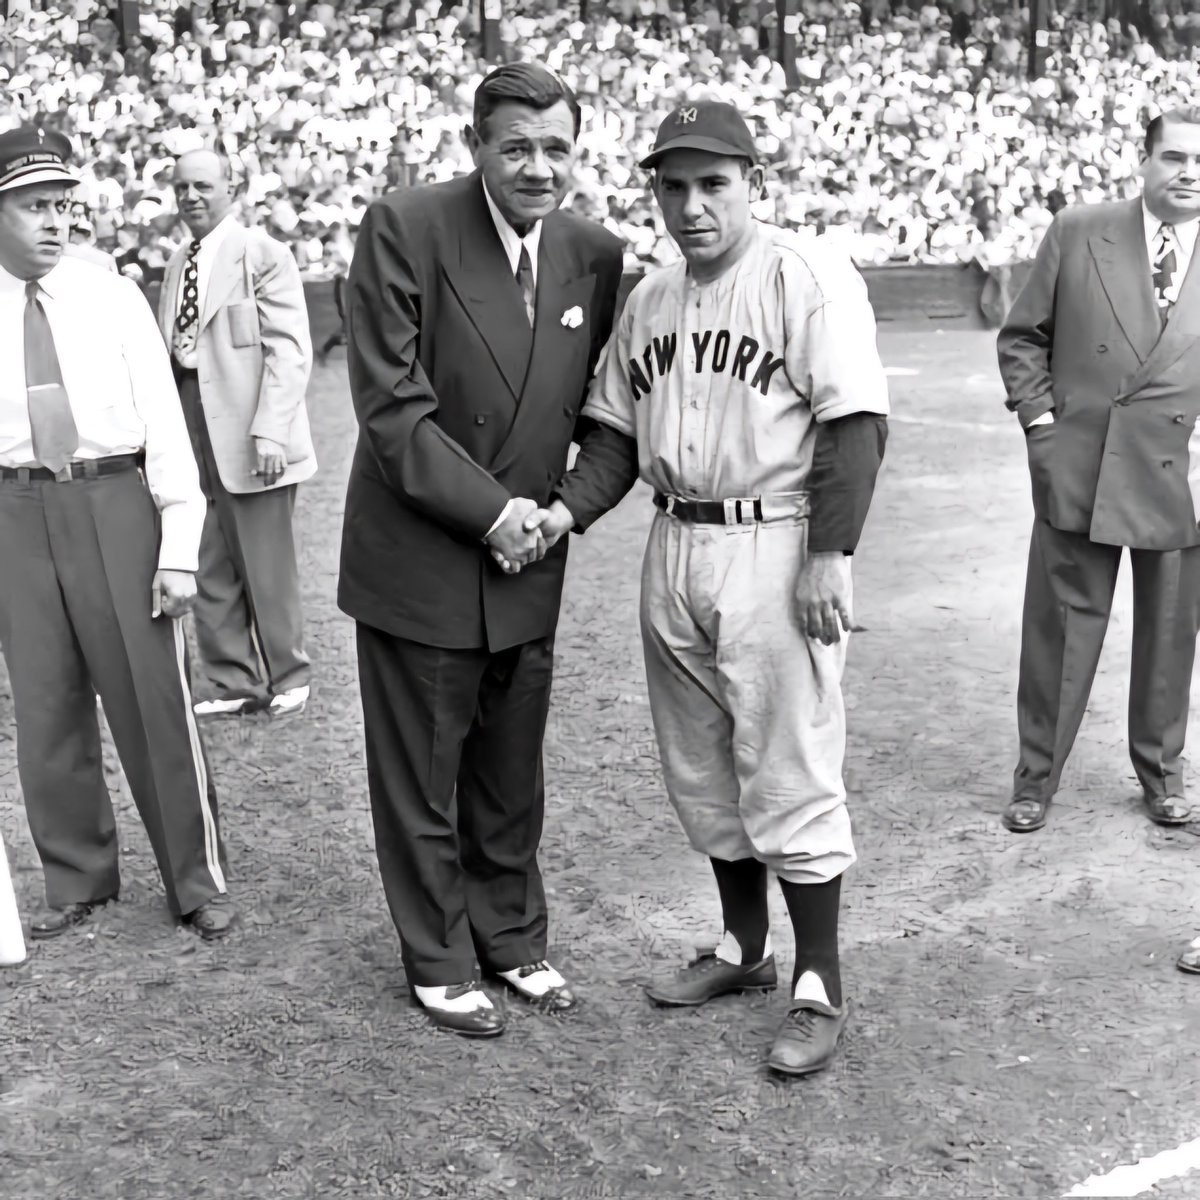 In honor of #BabeRuthDay, here's Grampa Yogi and the Babe at Sportsman's Park in St. Louis on June 19, 1948. Note Grampa's road uni: no pinstripes! 🙏⚾️❤️ #Yankees #MLB